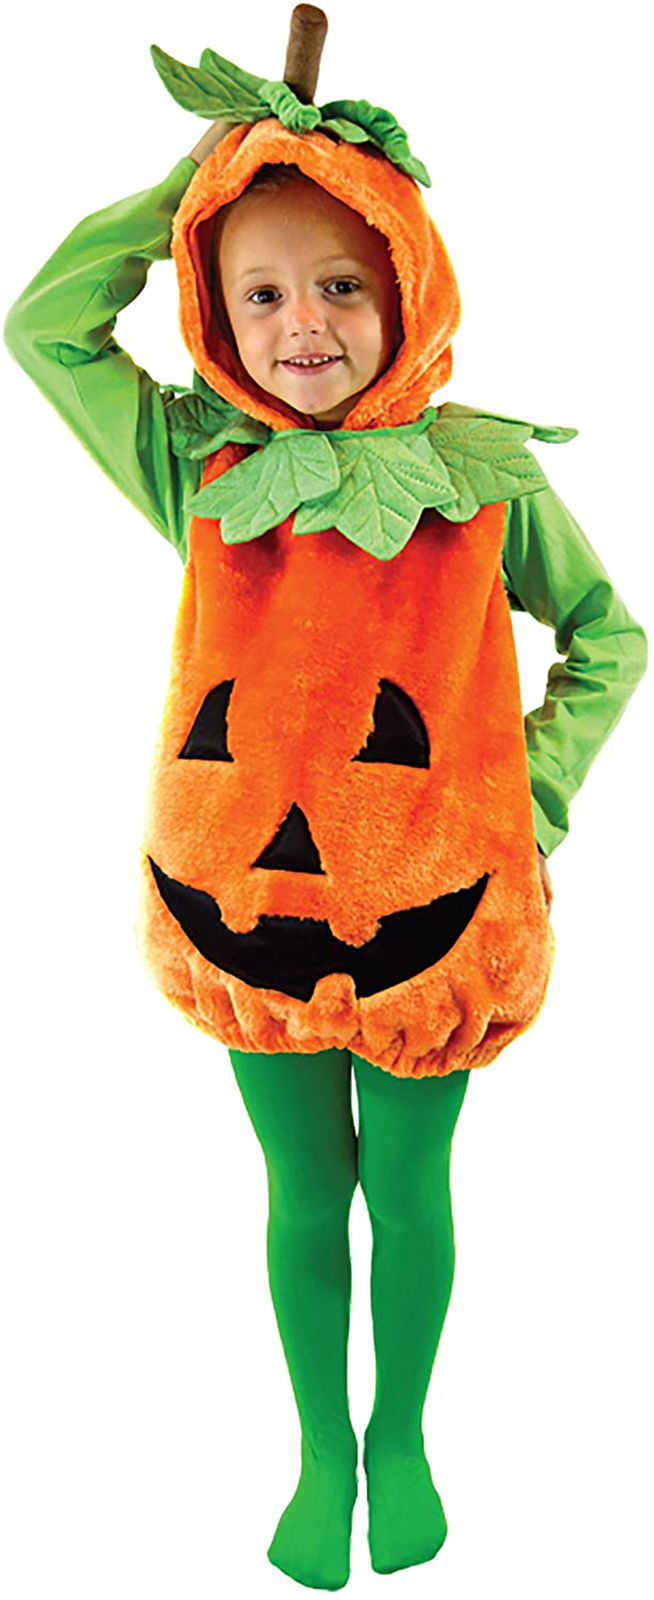 Spooktacular Creations Deluxe Pumpkin Costume Set NEW! 3T, 34-40 inches tall